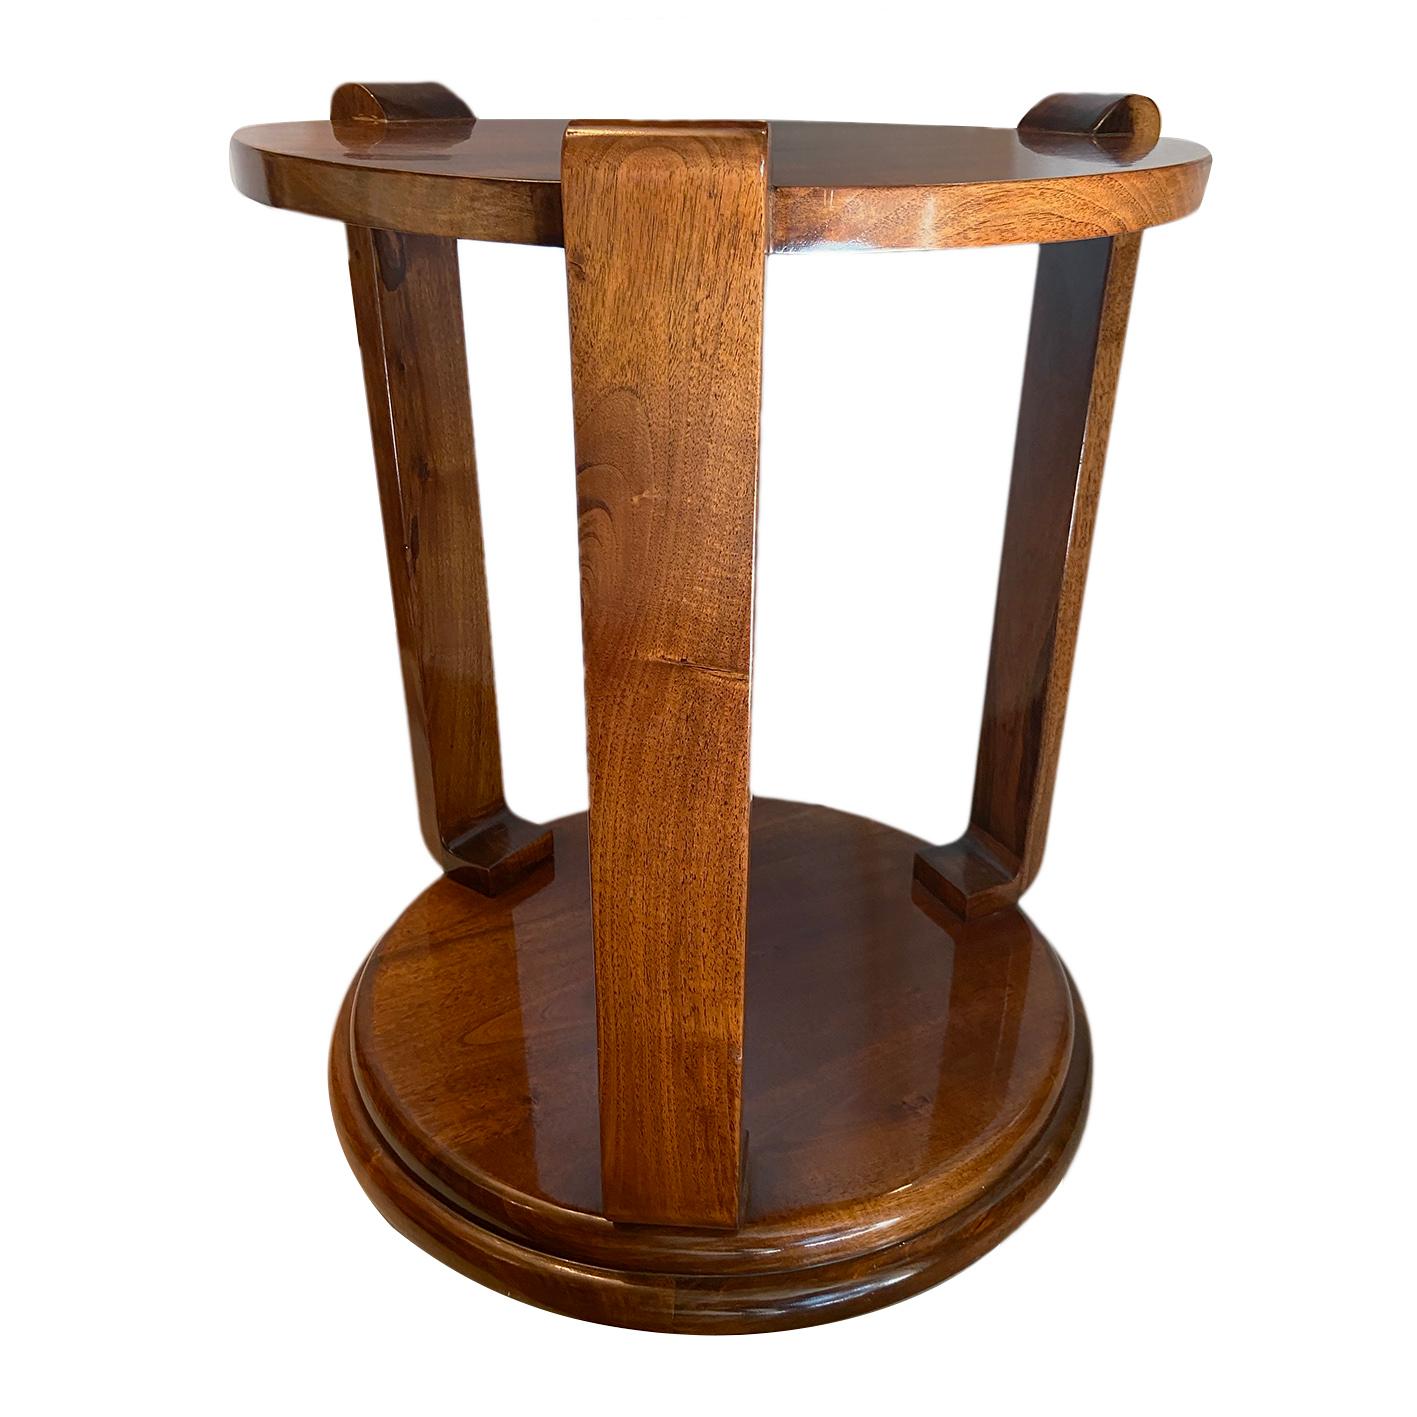 A French circa 1950s Art Deco style side table.

Measurements:
Diameter 21.5